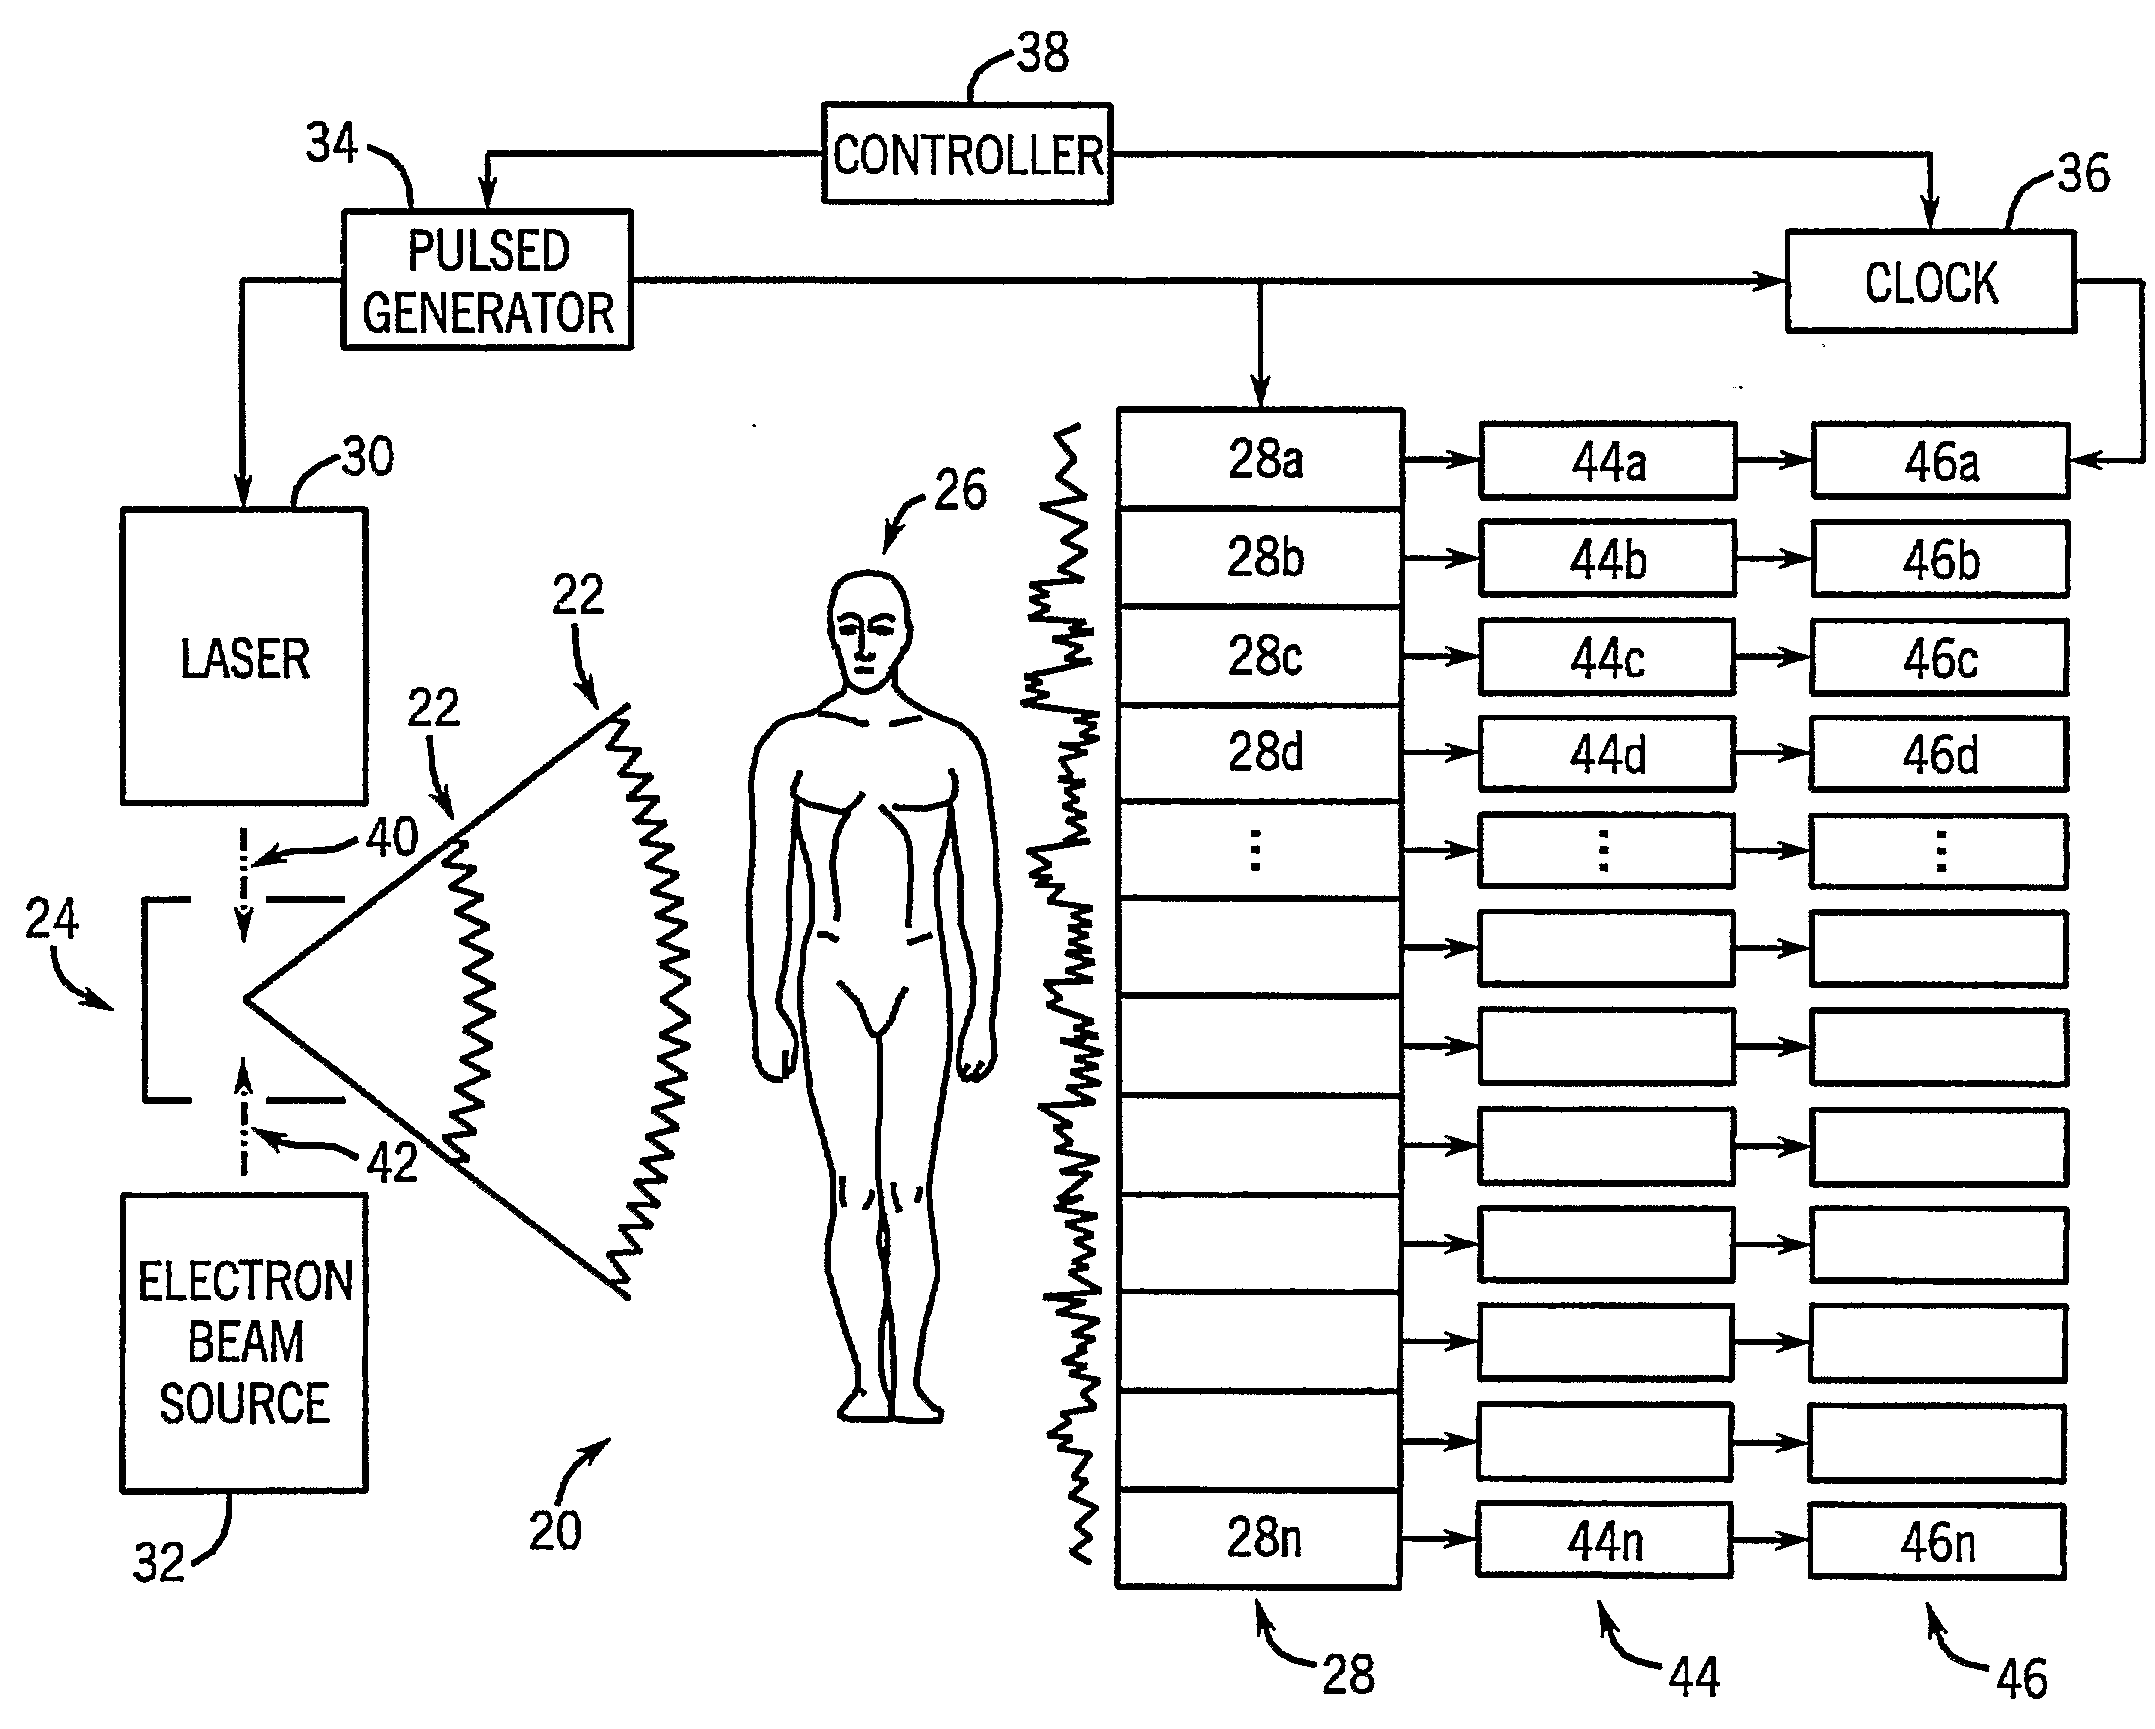 System and method for time-of-flight imaging